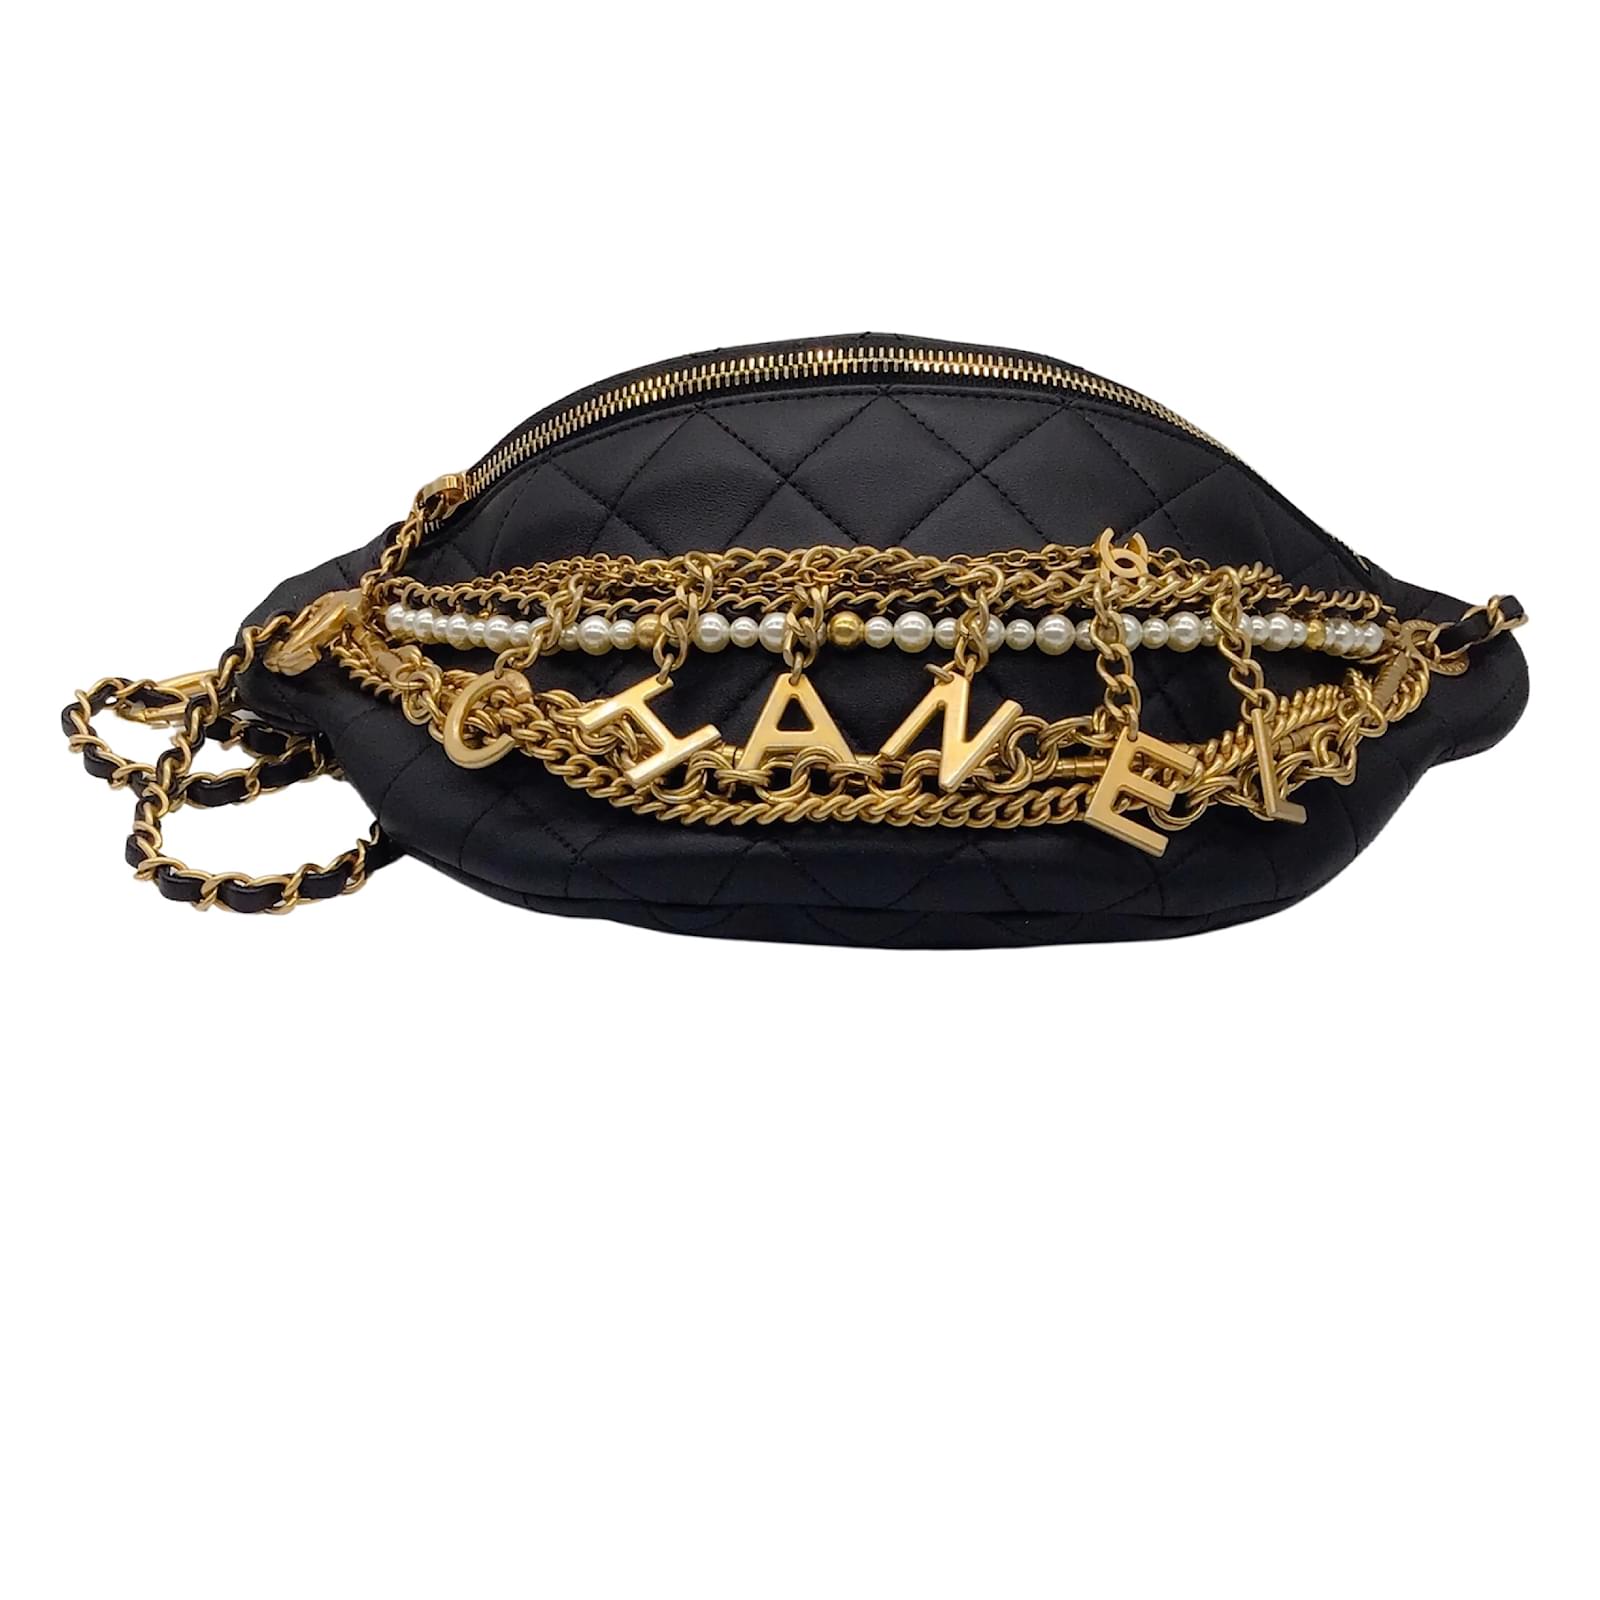 Chanel All About Chains Belt Bag Black